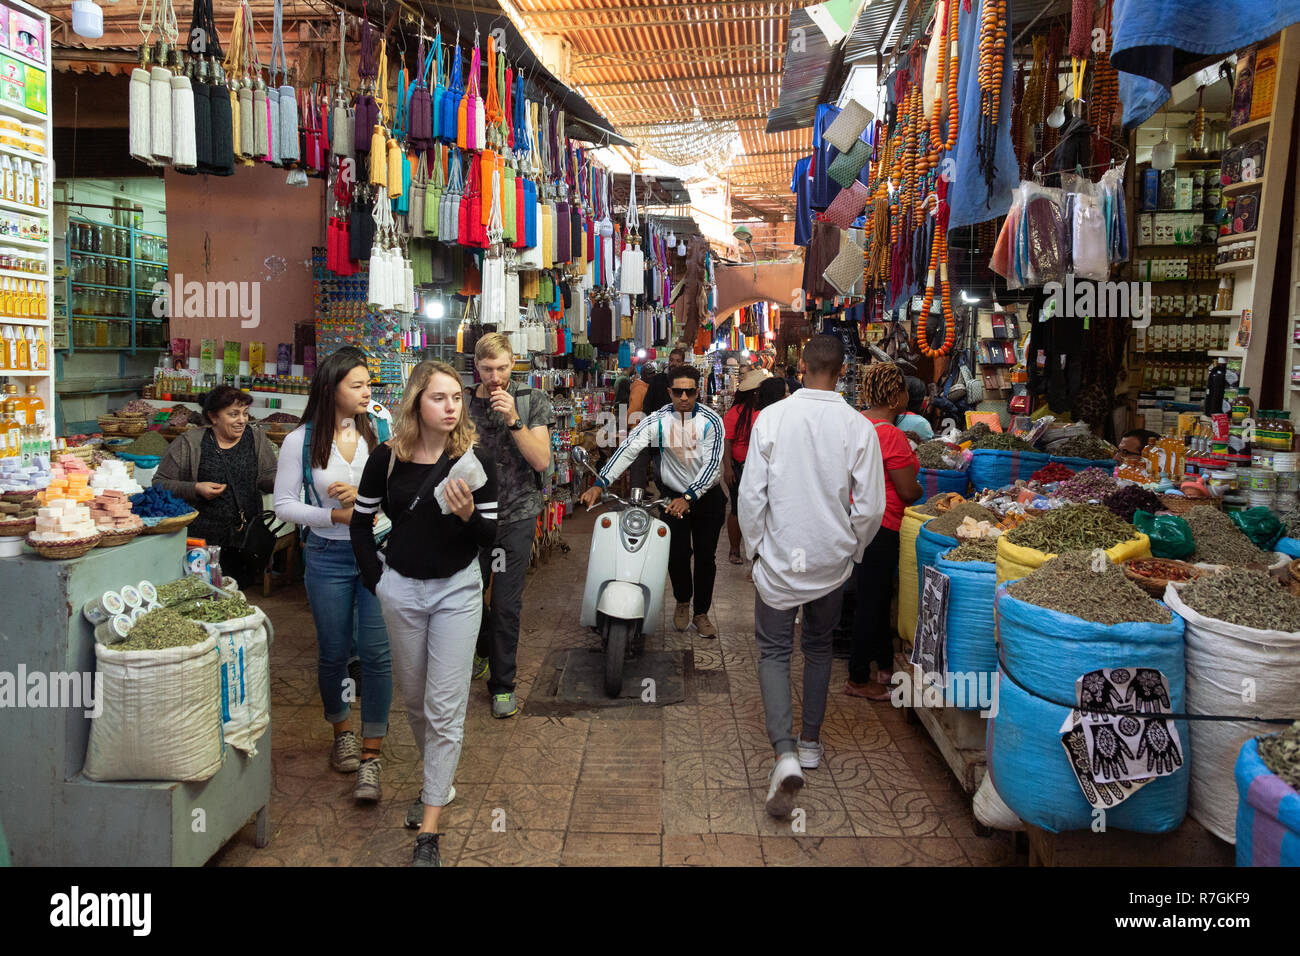 Marrakesh souk - tourists and local people shopping in the crowded souks, Marrakech, Morocco North Africa Stock Photo